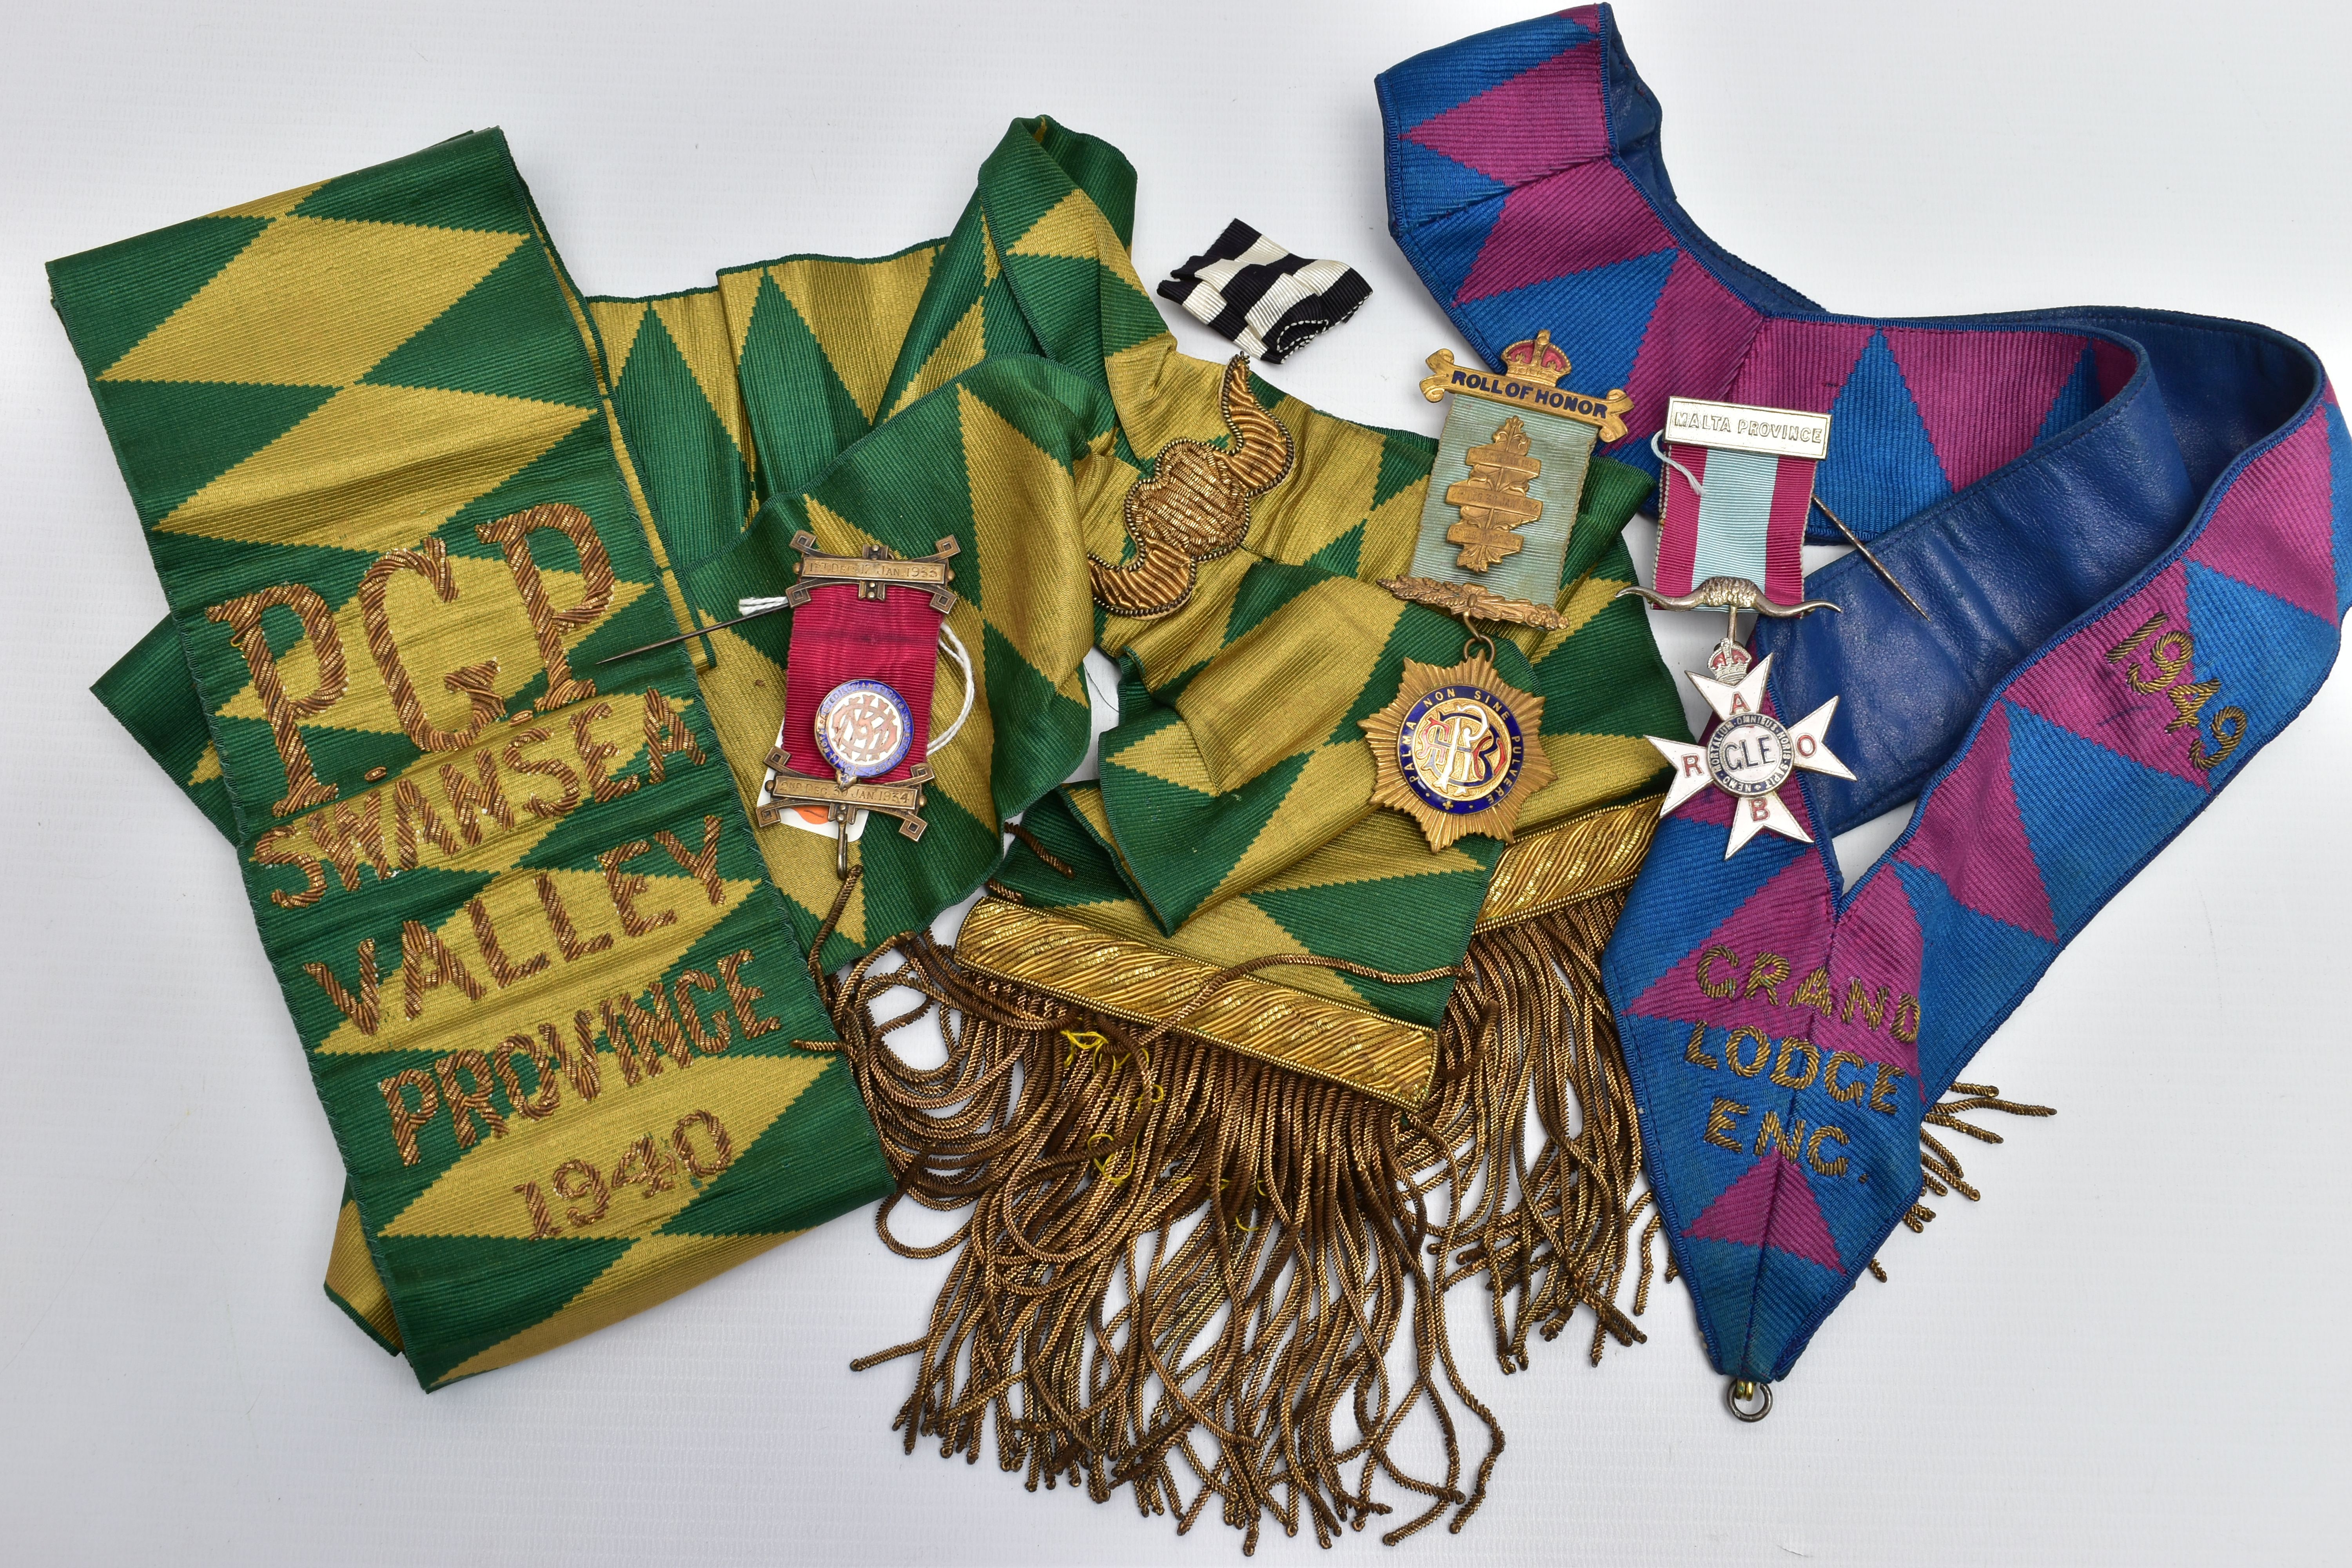 AN ASSORTMENT OF MASONIC MEDALLIONS AND SASHES, to include a yellow metal 'Roll of Honor'